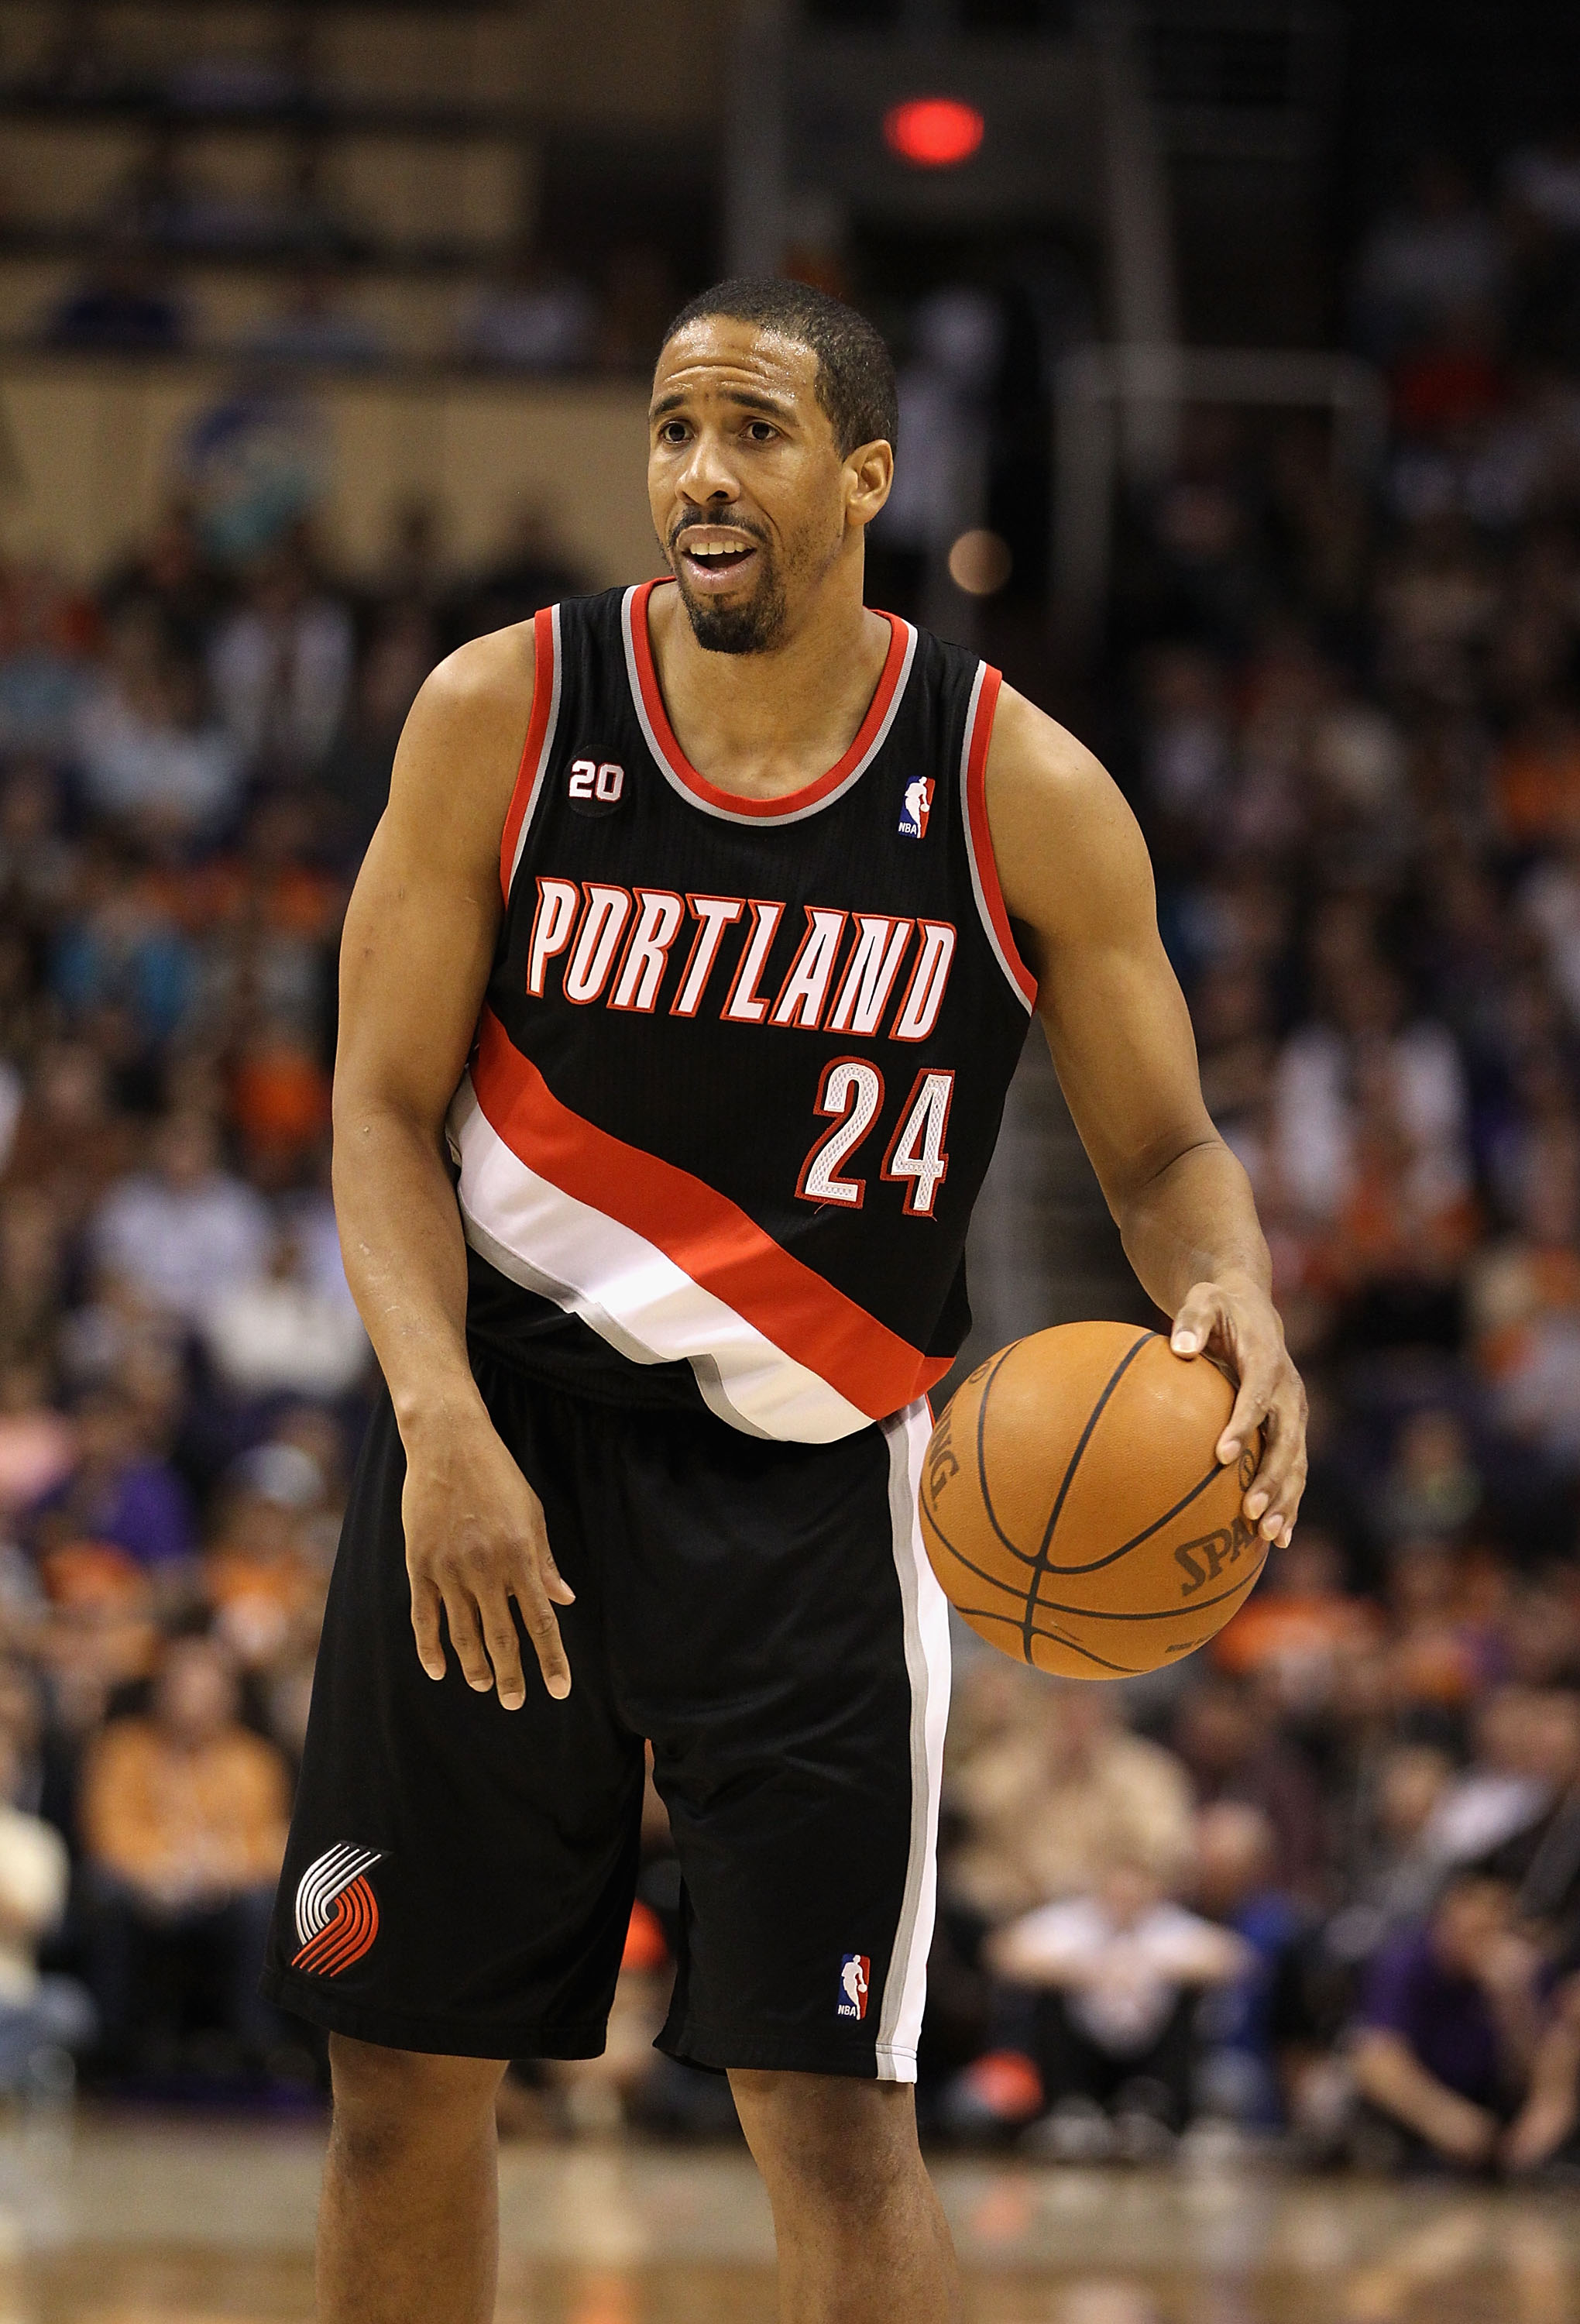 PHOENIX, AZ - JANUARY 14:  Andre Miller #24 of the Portland Trail Blazers in action during the NBA game against the Phoenix Suns at US Airways Center on January 14, 2011 in Phoenix, Arizona. The Suns defeated the Trail Blazers 115-111. NOTE TO USER: User